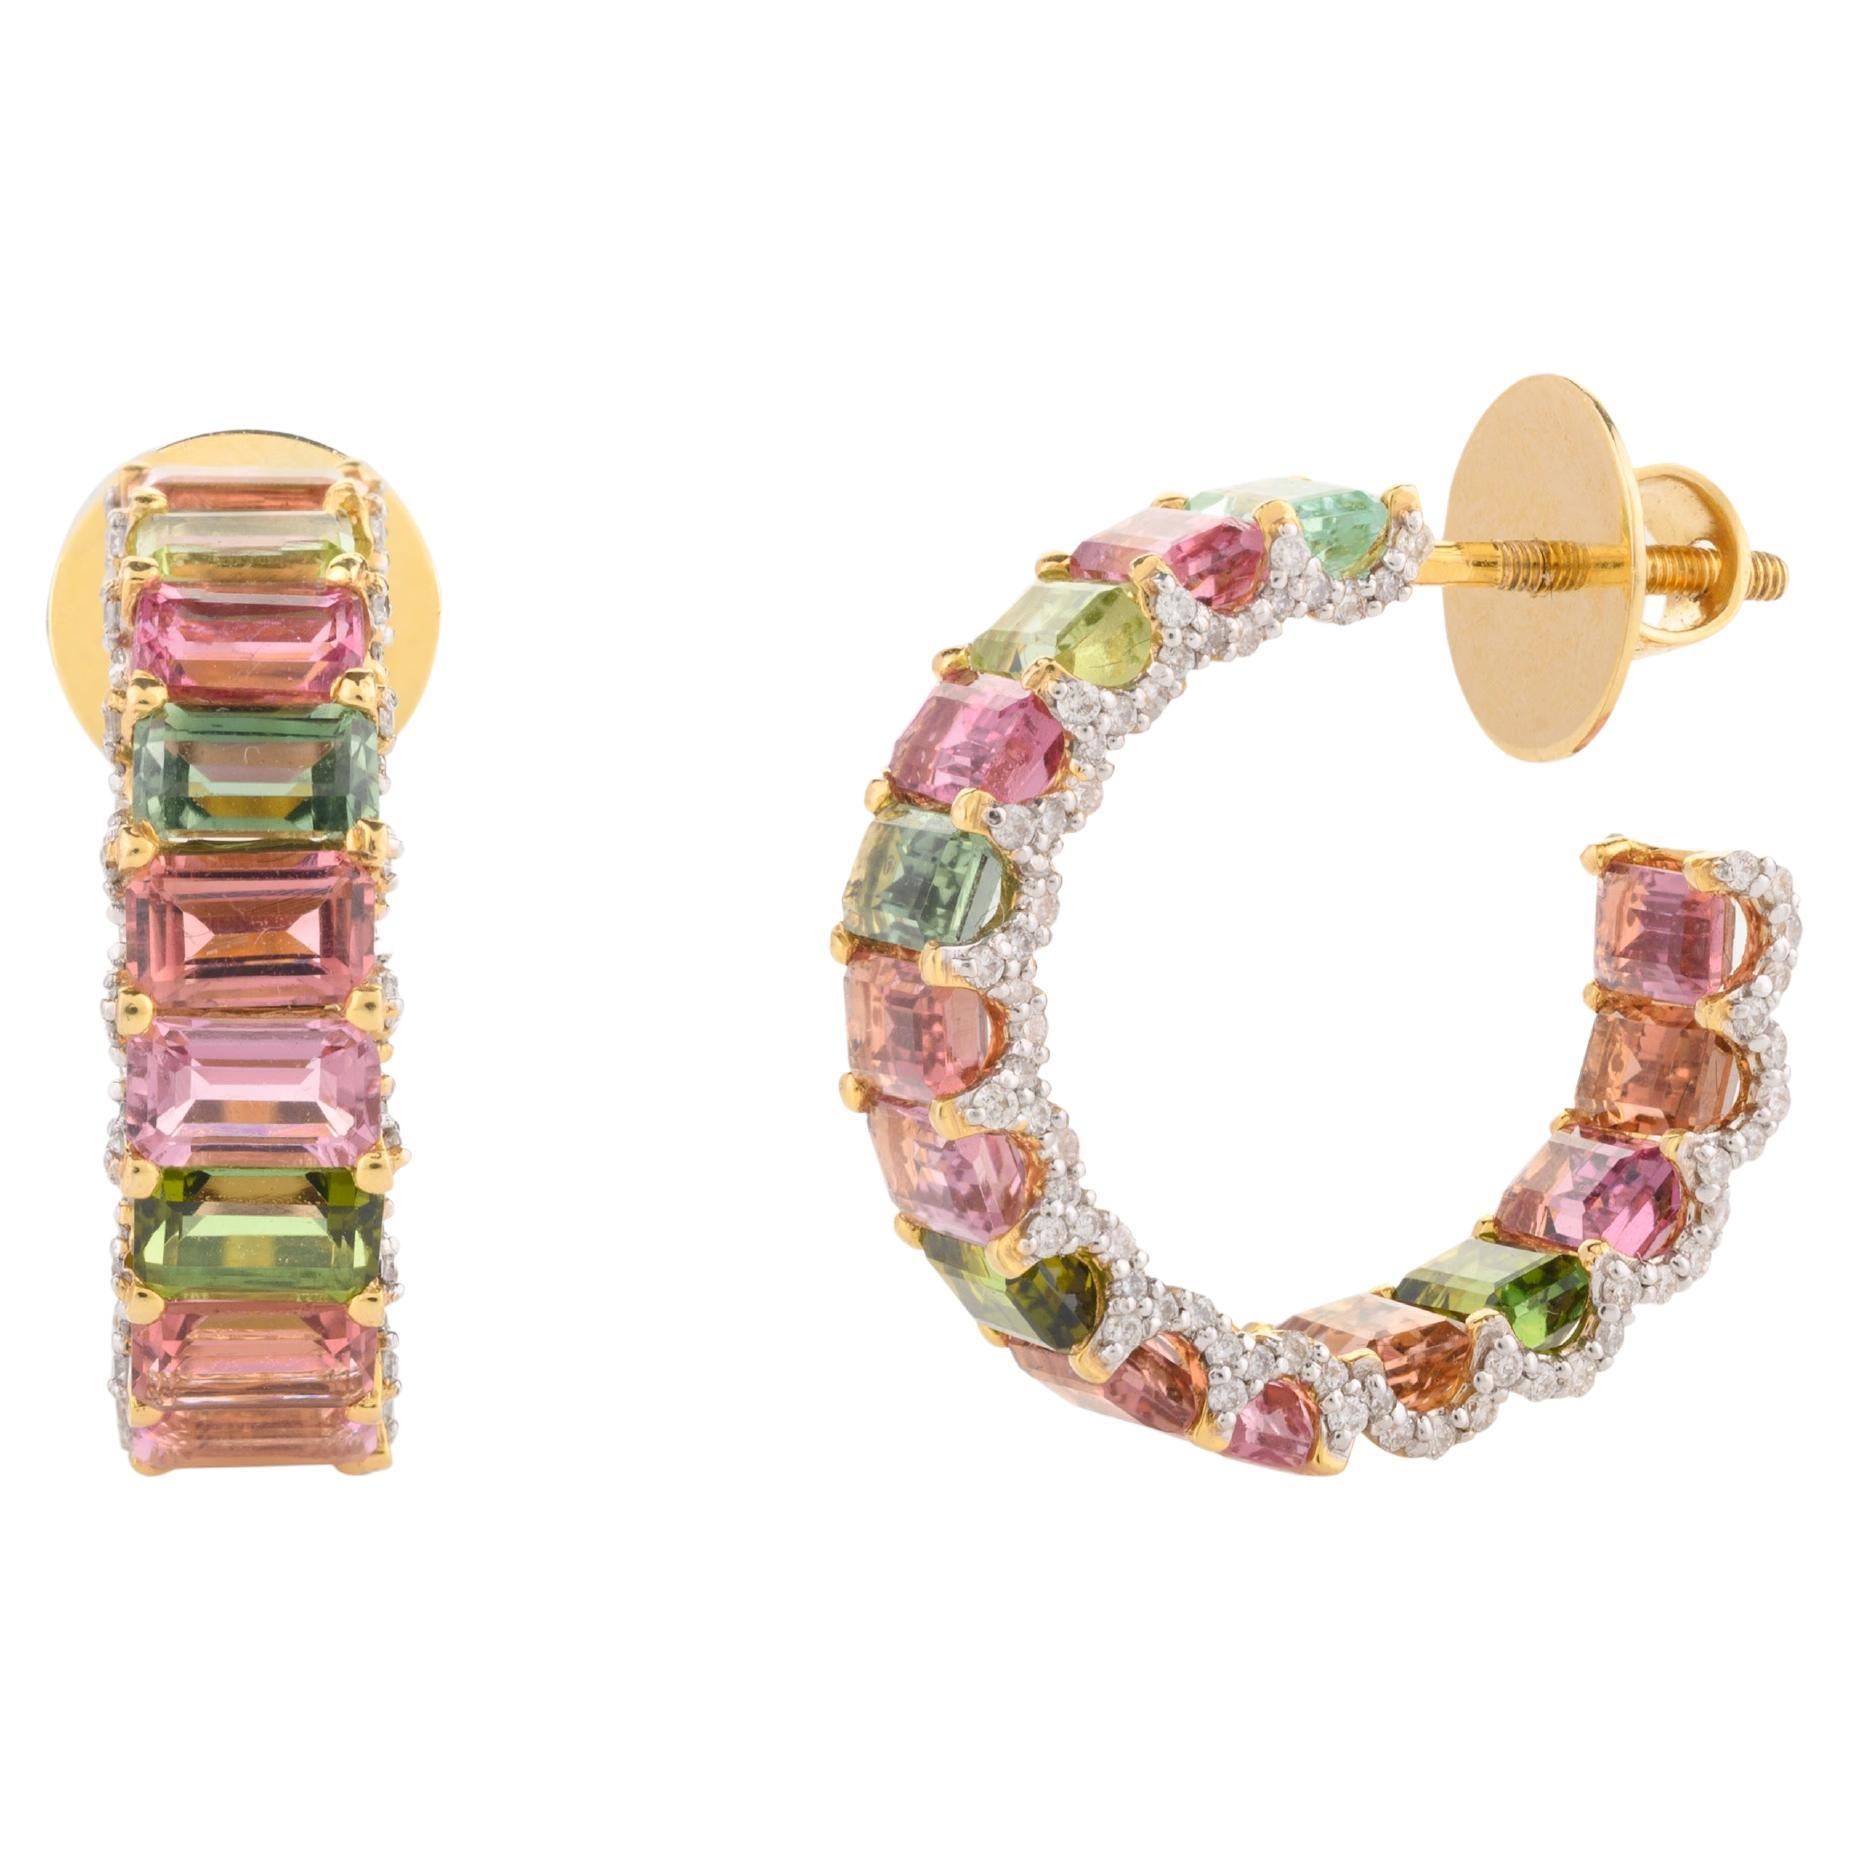 One-of-a-Kind Baguette Tourmaline and Diamond C-Hoop Earrings 14k Yellow Gold For Sale